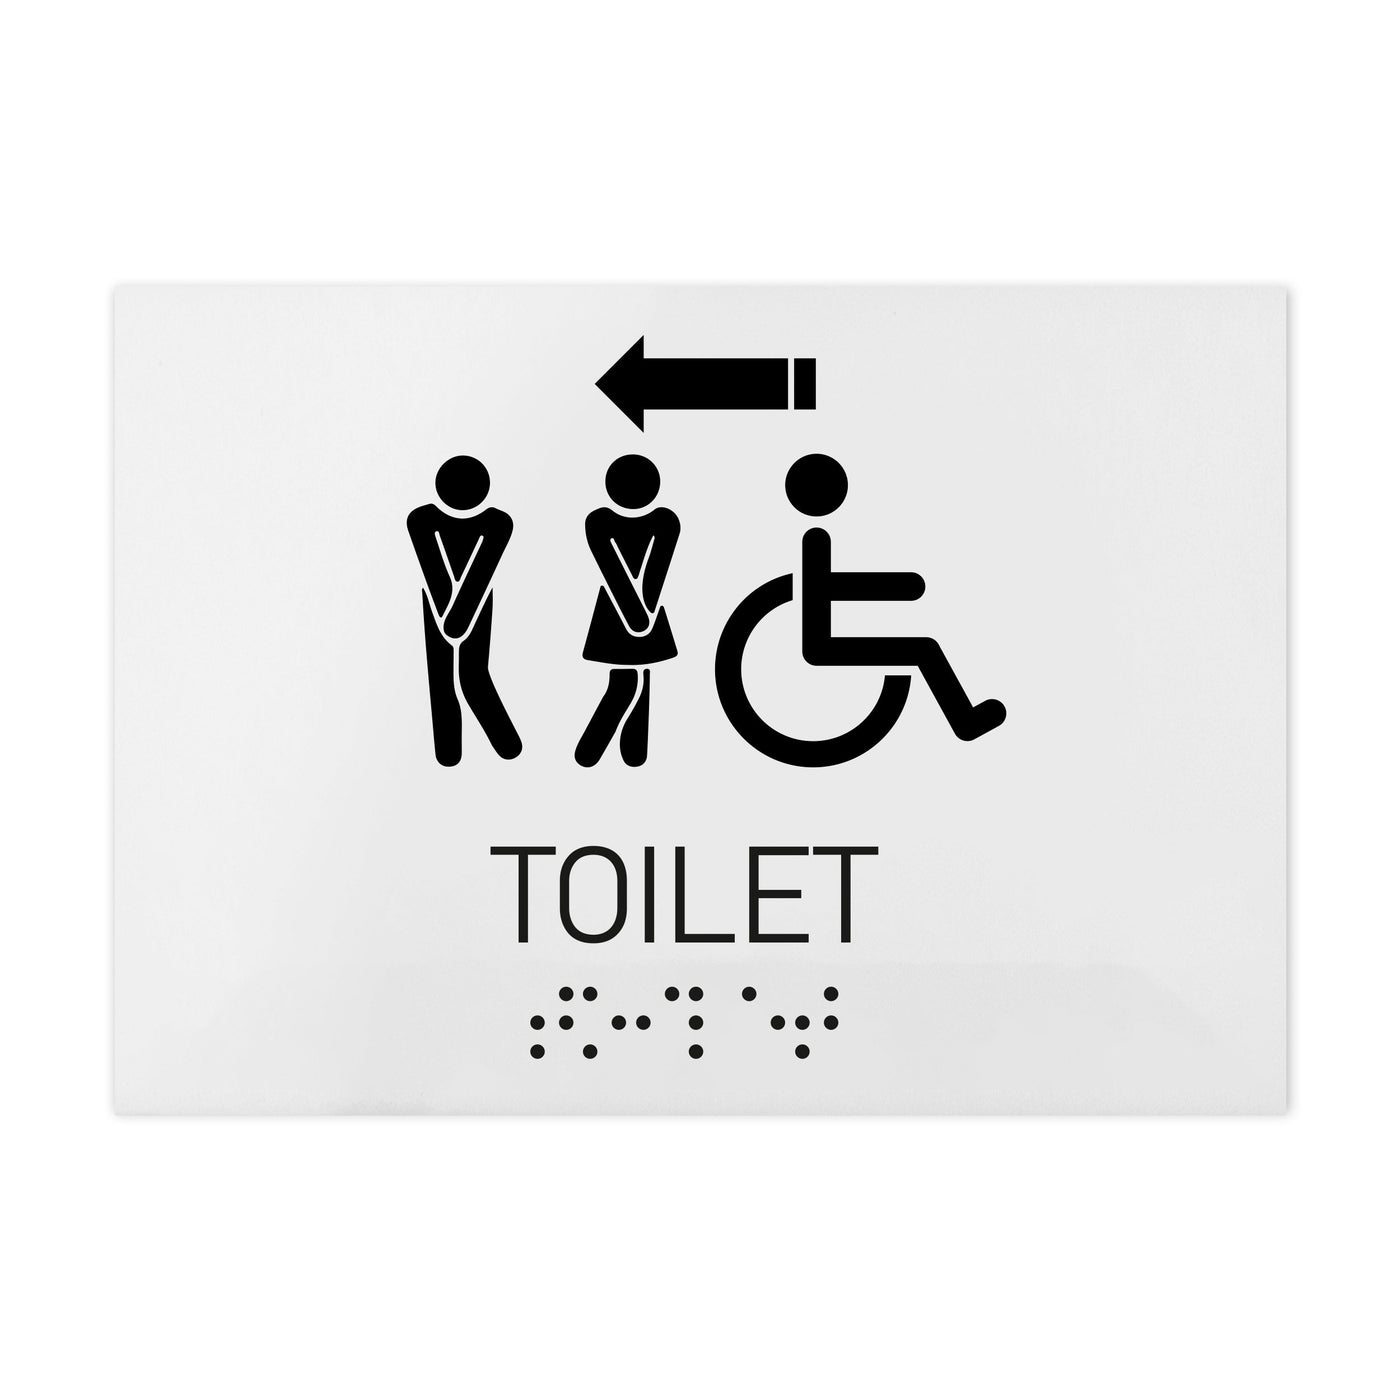 Bathroom Signs - All Gender With Weelchair Directional Restroom Sign - Milk Acrylic